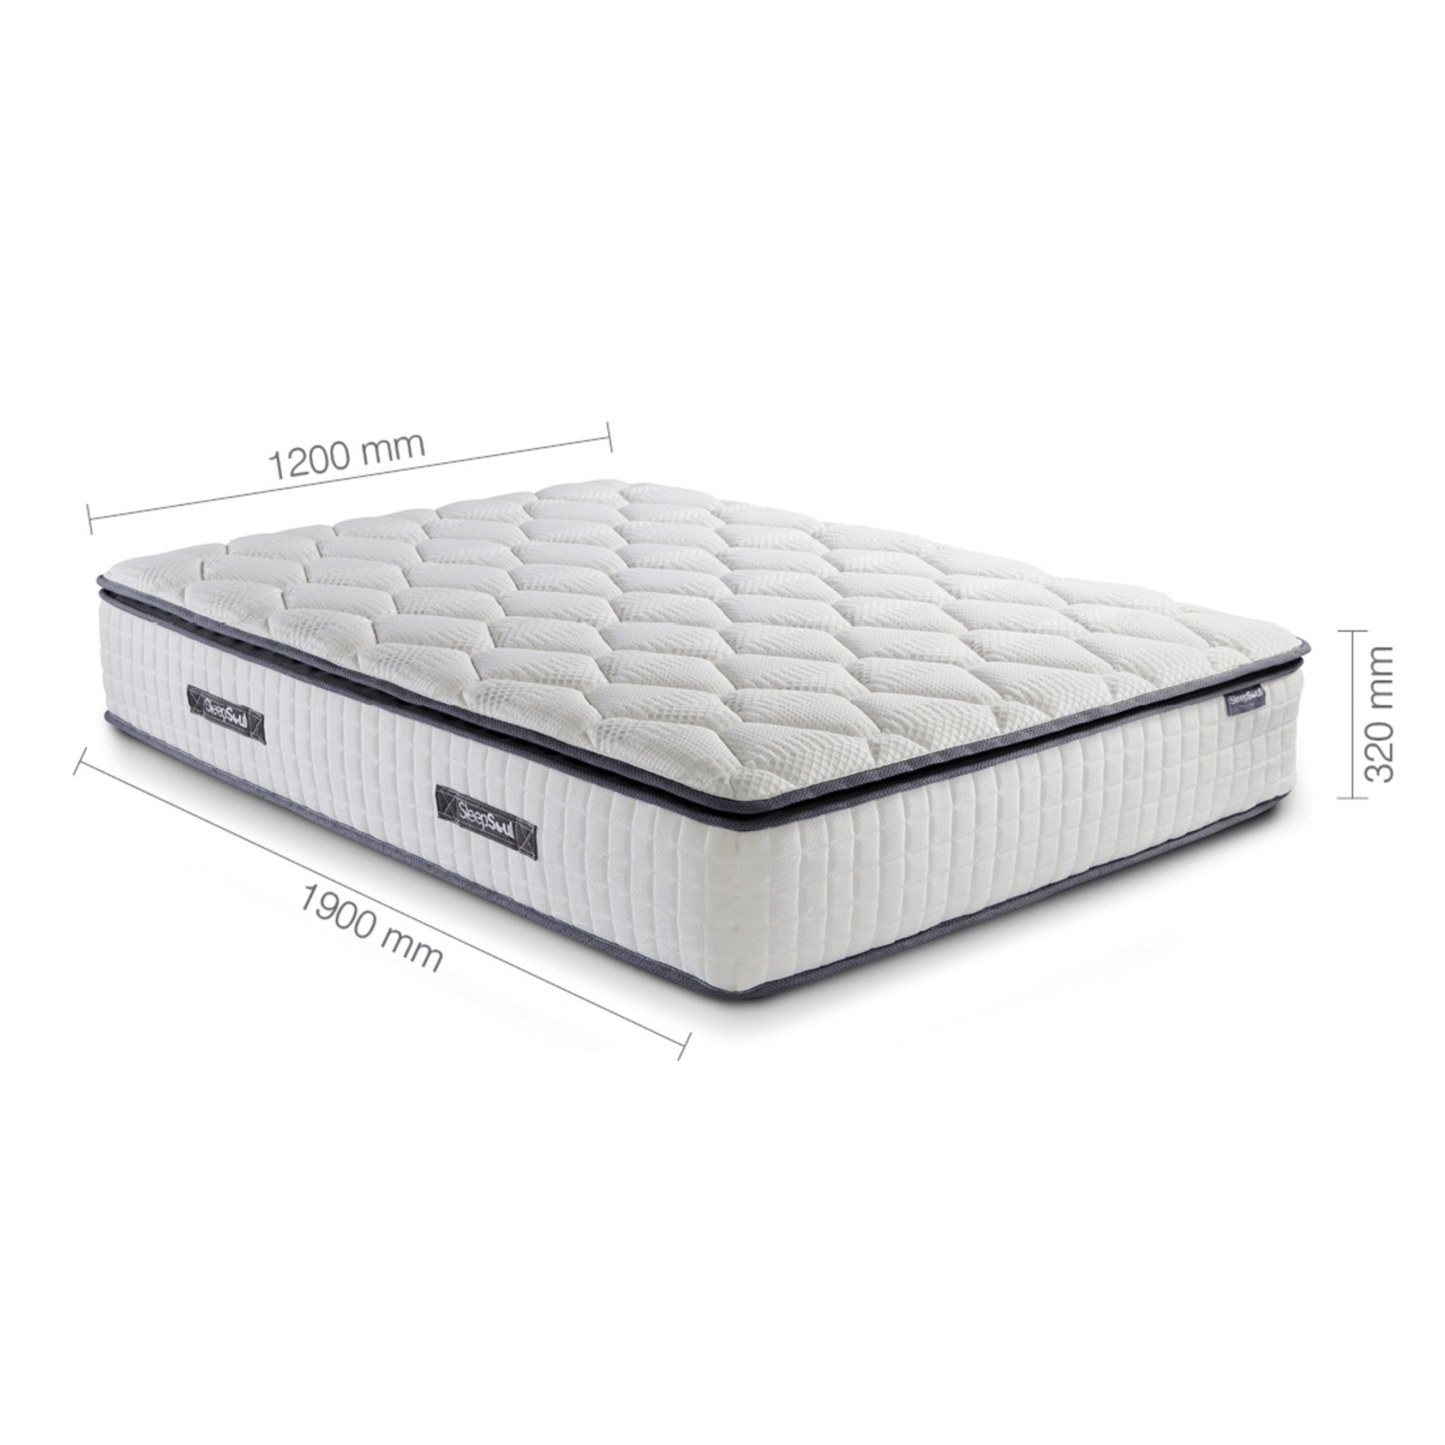 SleepSoul bliss 800 pocket spring and memory foam pillow top small double mattress dimensions